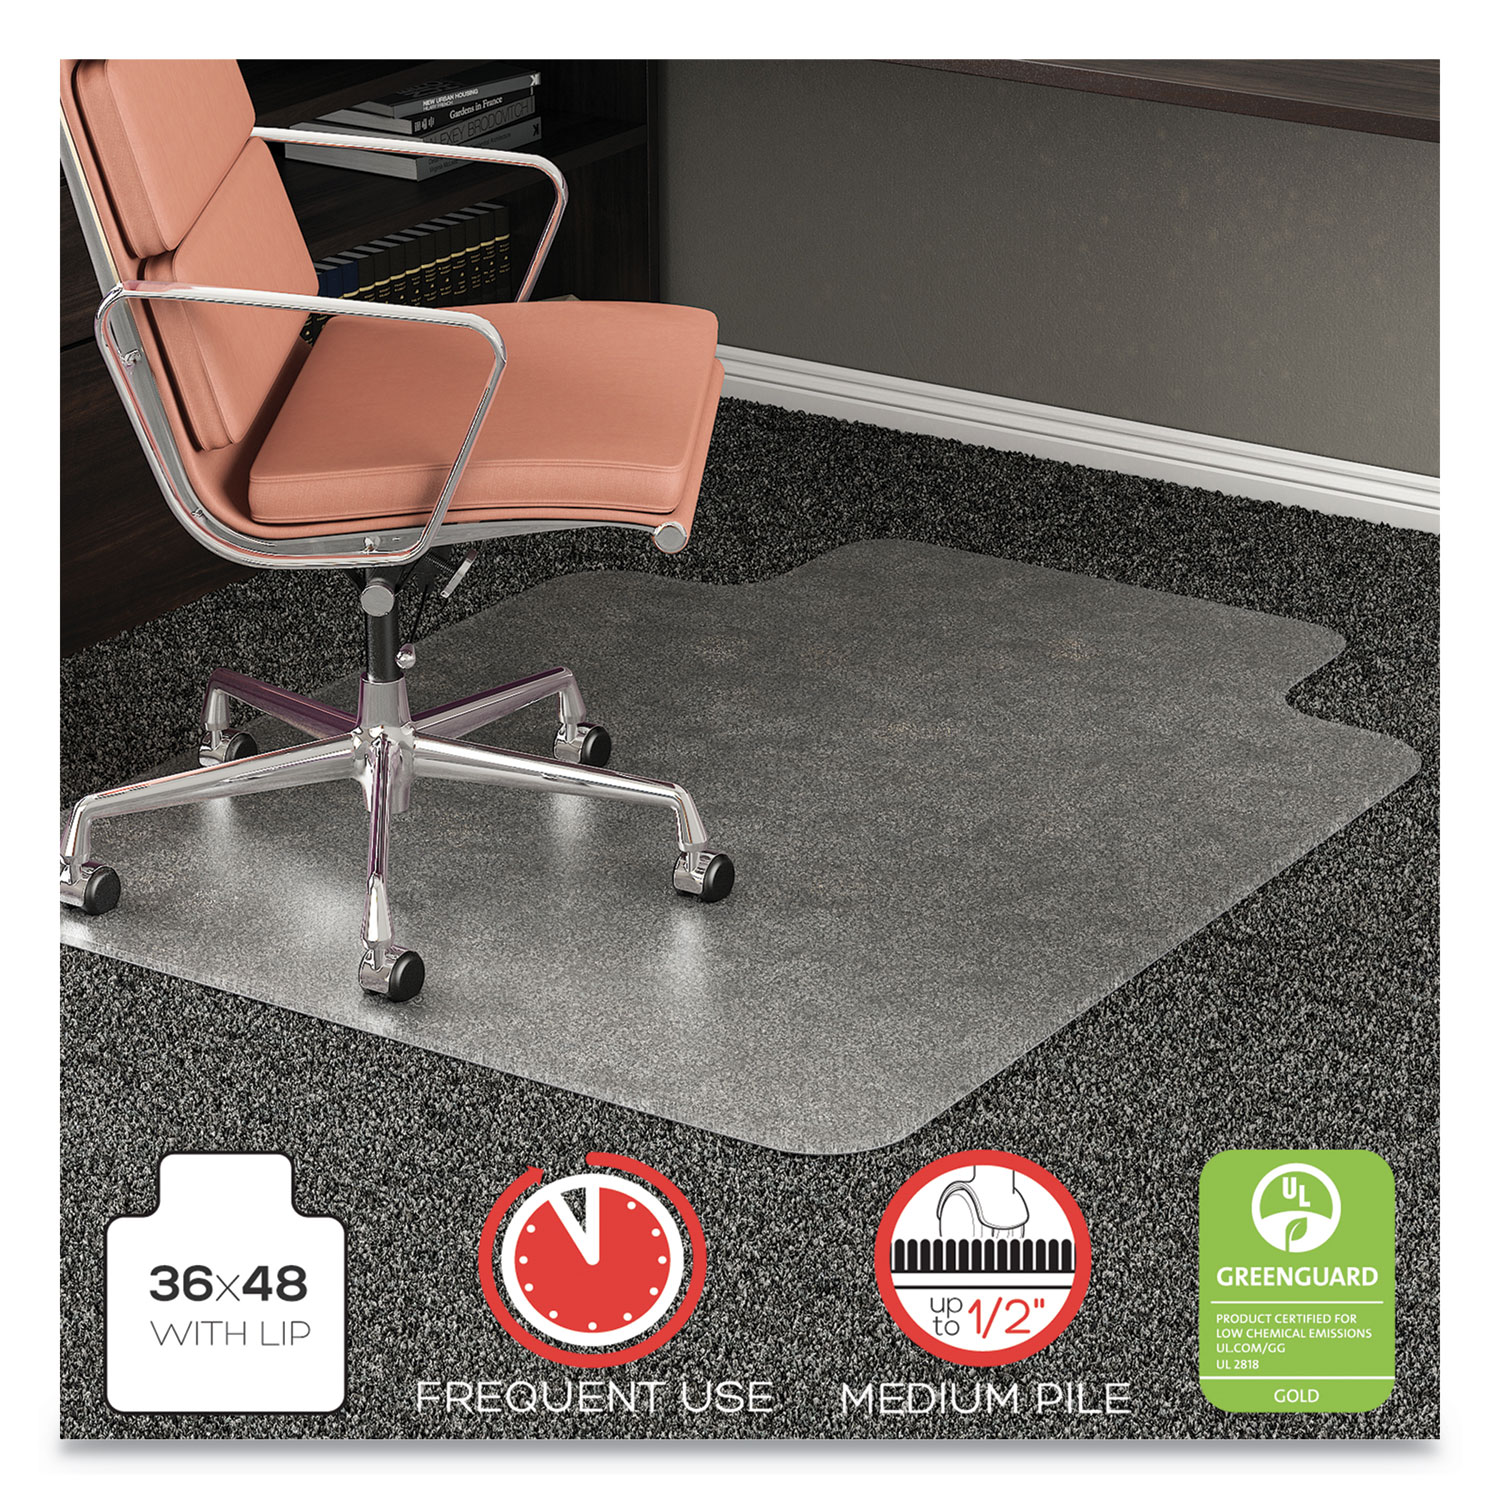  deflecto CM15113COM RollaMat Frequent Use Chair Mat, Med Pile Carpet, Roll, 36 x 48, Lipped, Clear (DEFCM15113COM) 